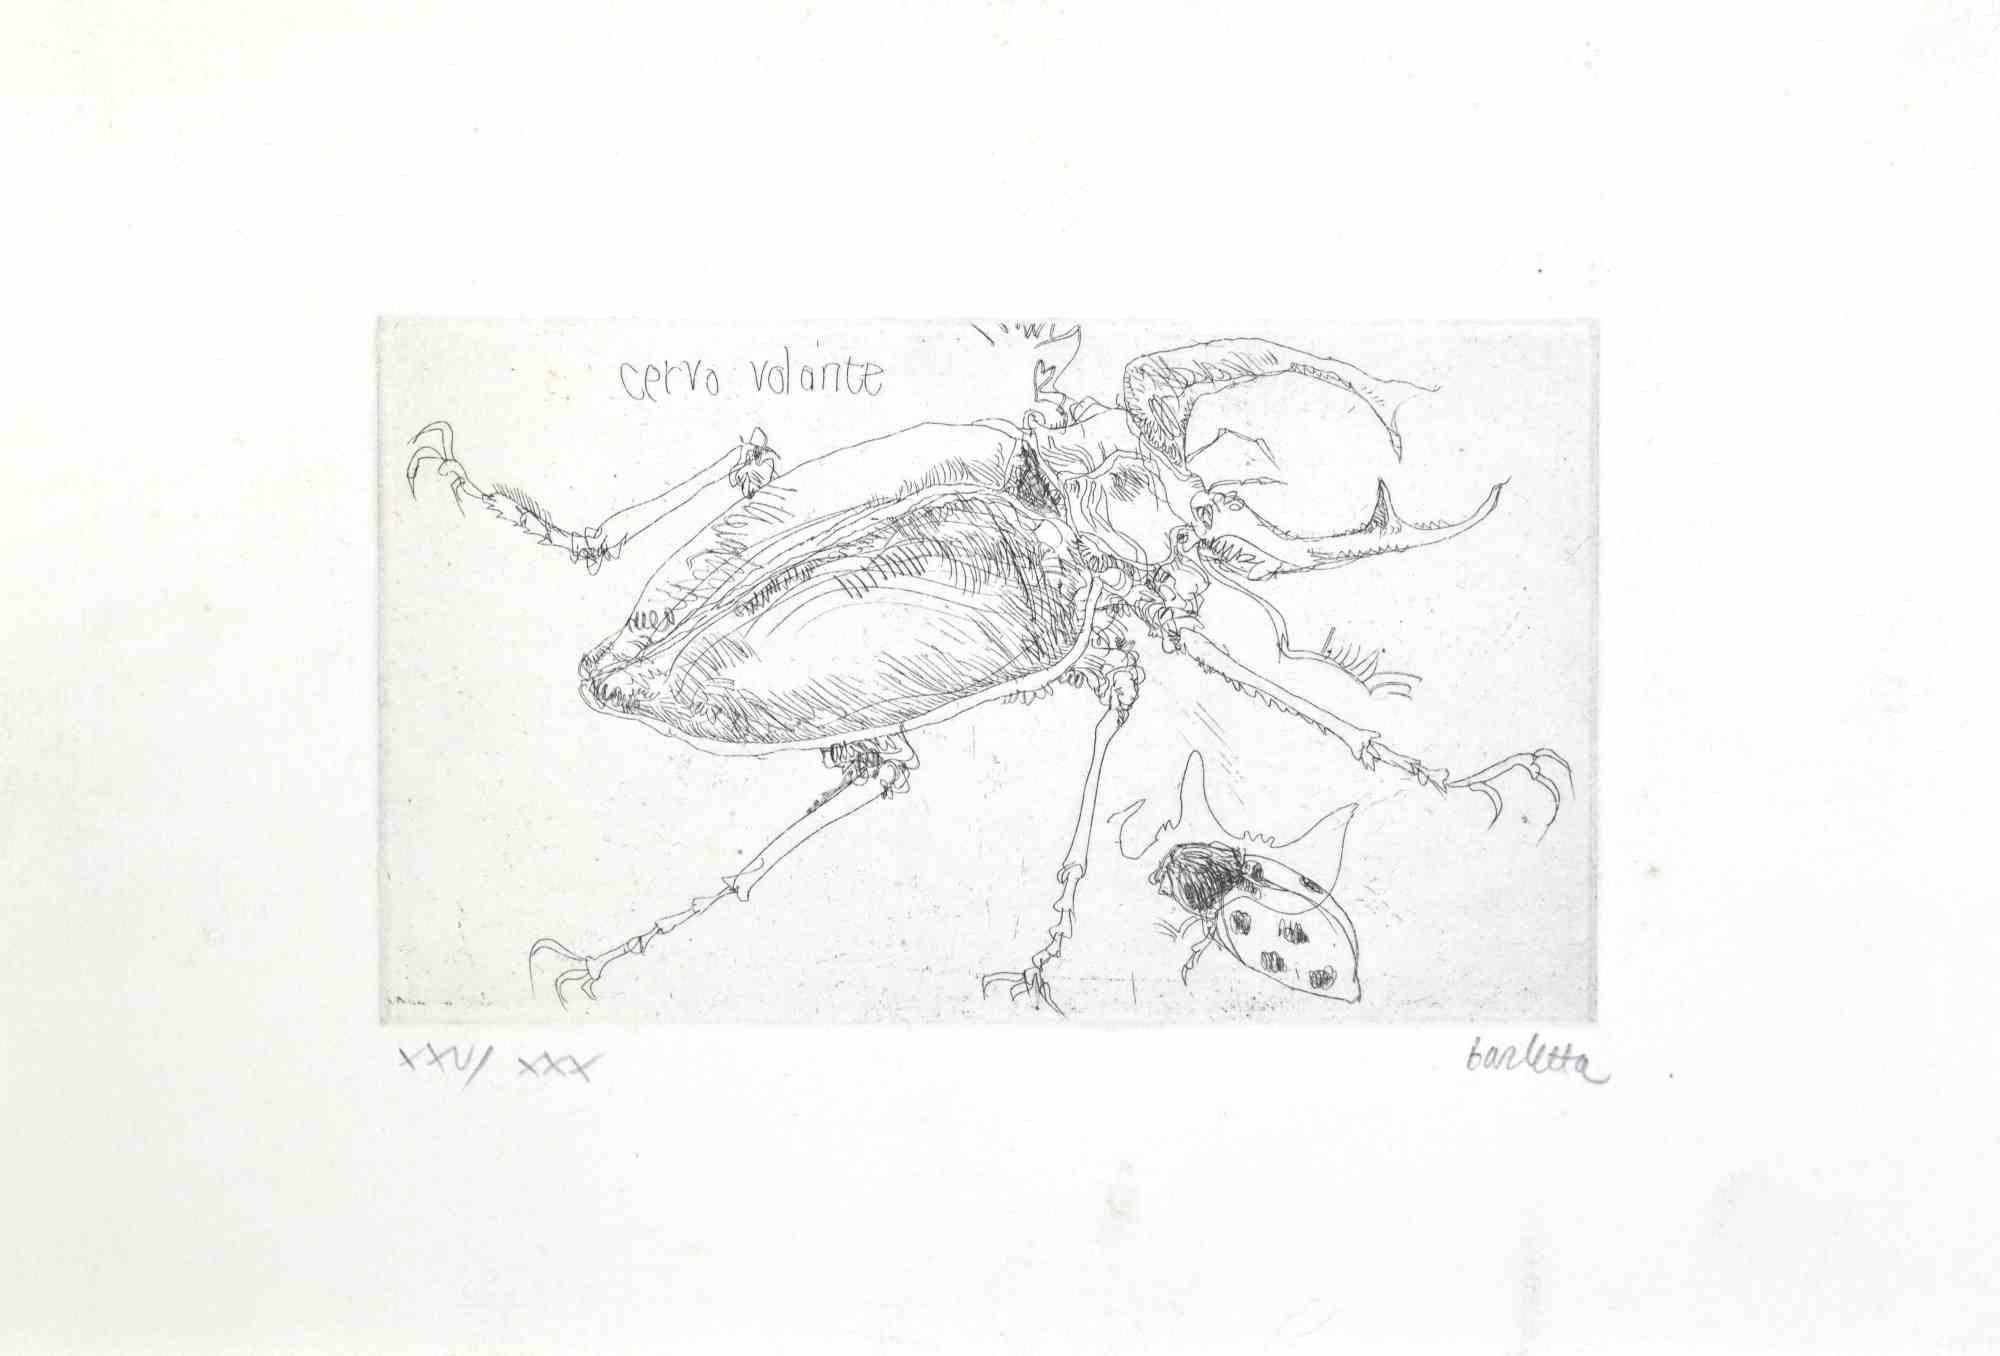 Insects  is an etching realized by  Sergio Barletta in 1974.

Hand-signed in pencil on the lower right. Numbered on the lower left in Roman numerals, from the edition of XXX prints.

Titled in Italian at the top left  "Cervo Volante".

edition